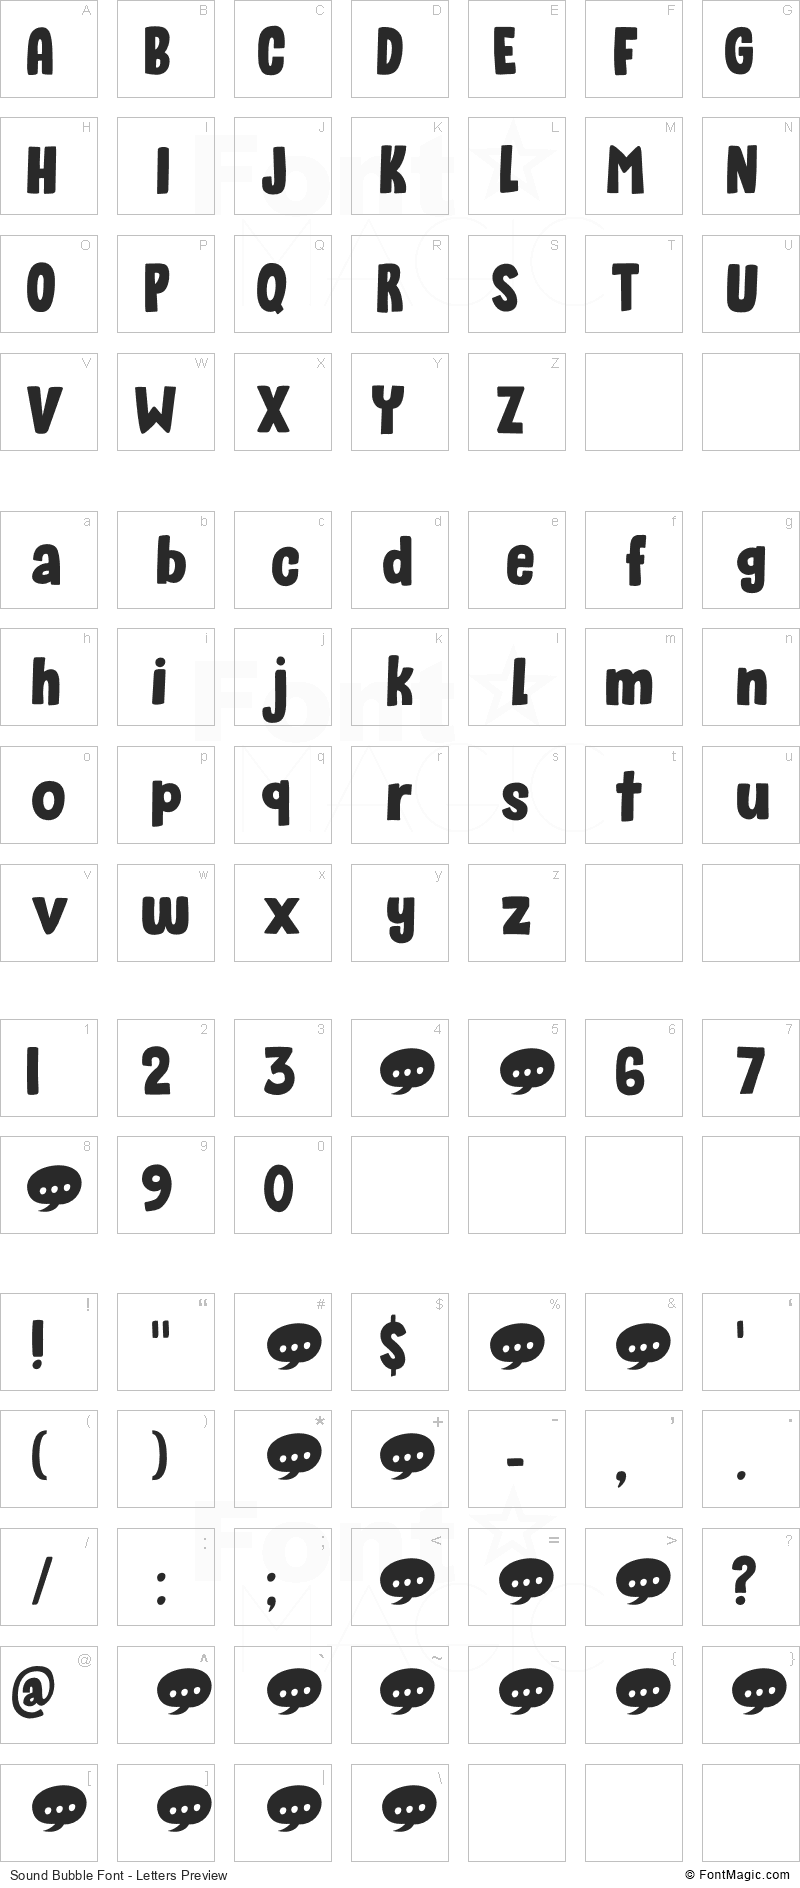 Sound Bubble Font - All Latters Preview Chart